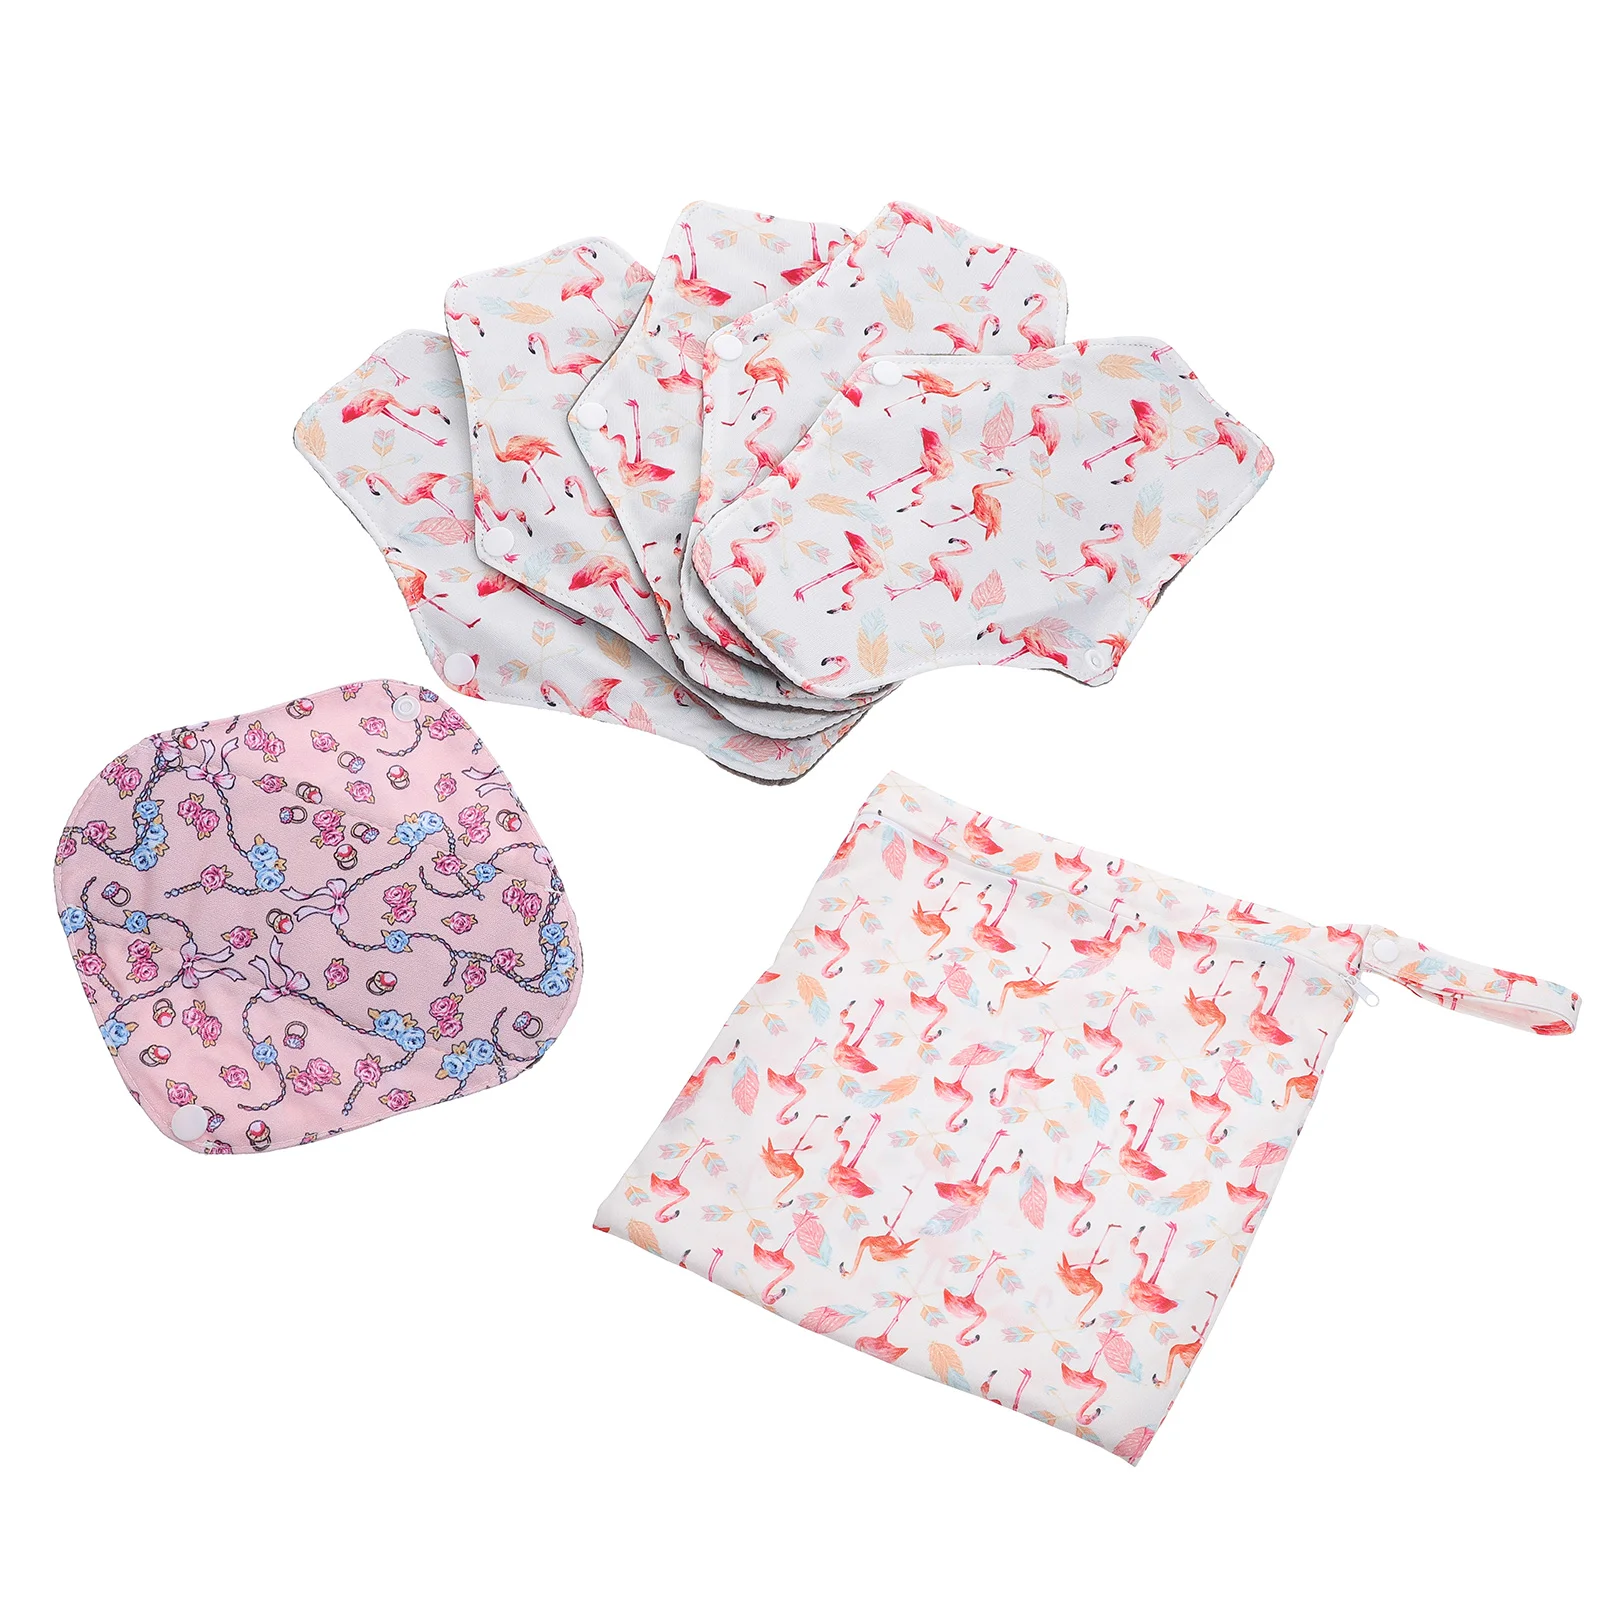 

Pads Reusable Cloth Sanitary Menstrual Washable Period Panty Liners Napkins Mama Liner Pad Puerpera Women Mat Charcoal Cotton